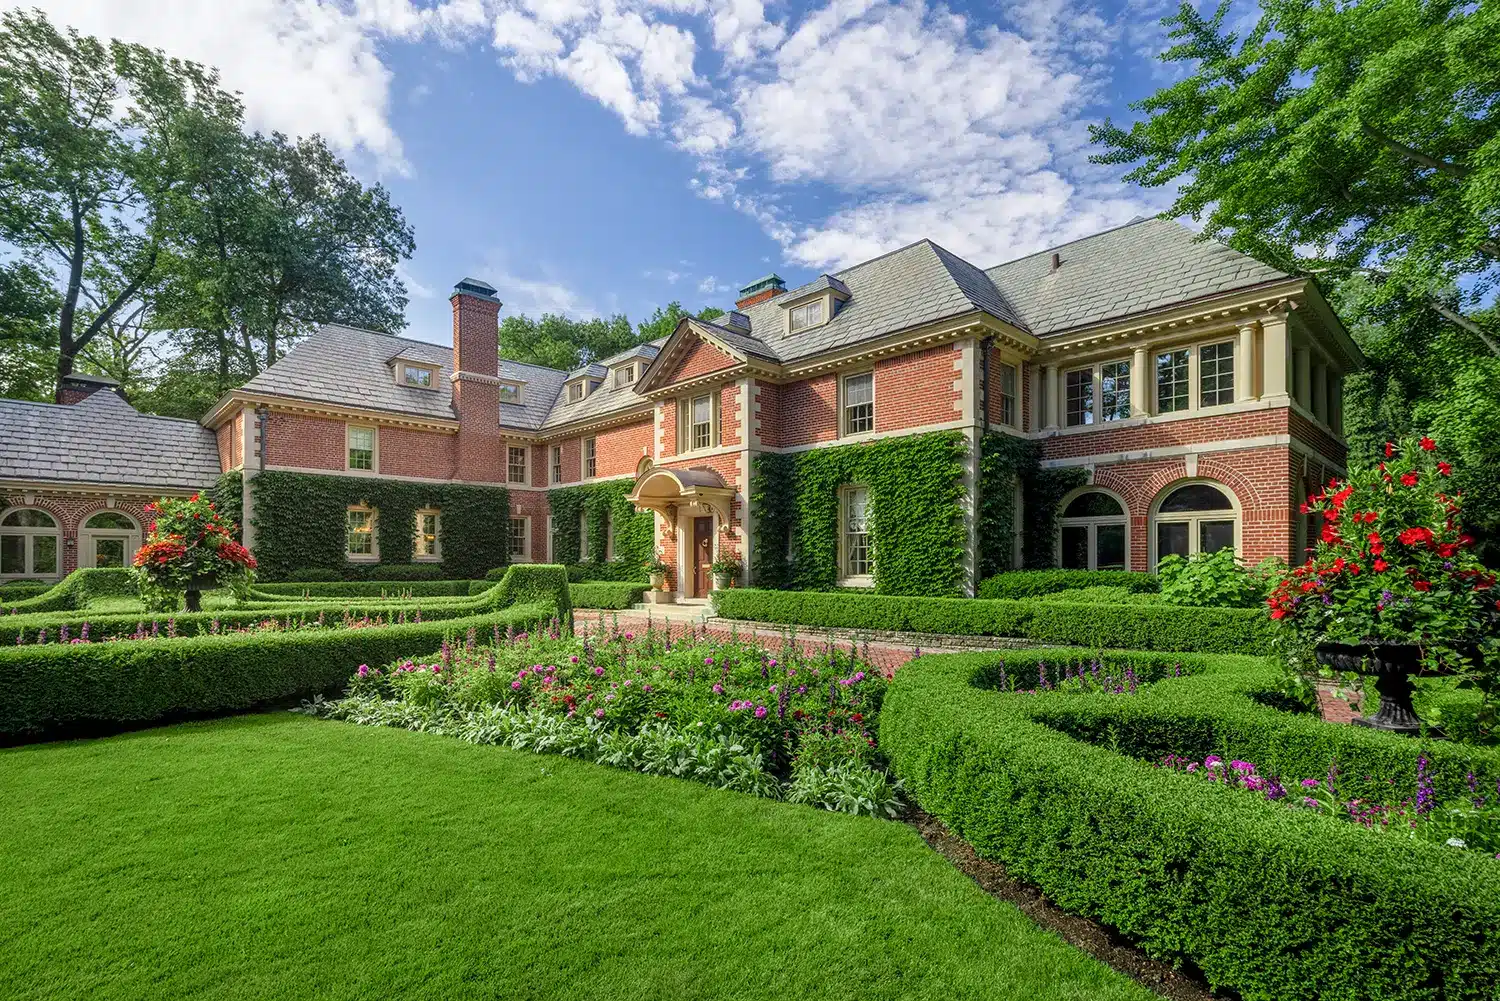 A large mansion with a lawn and hedges.